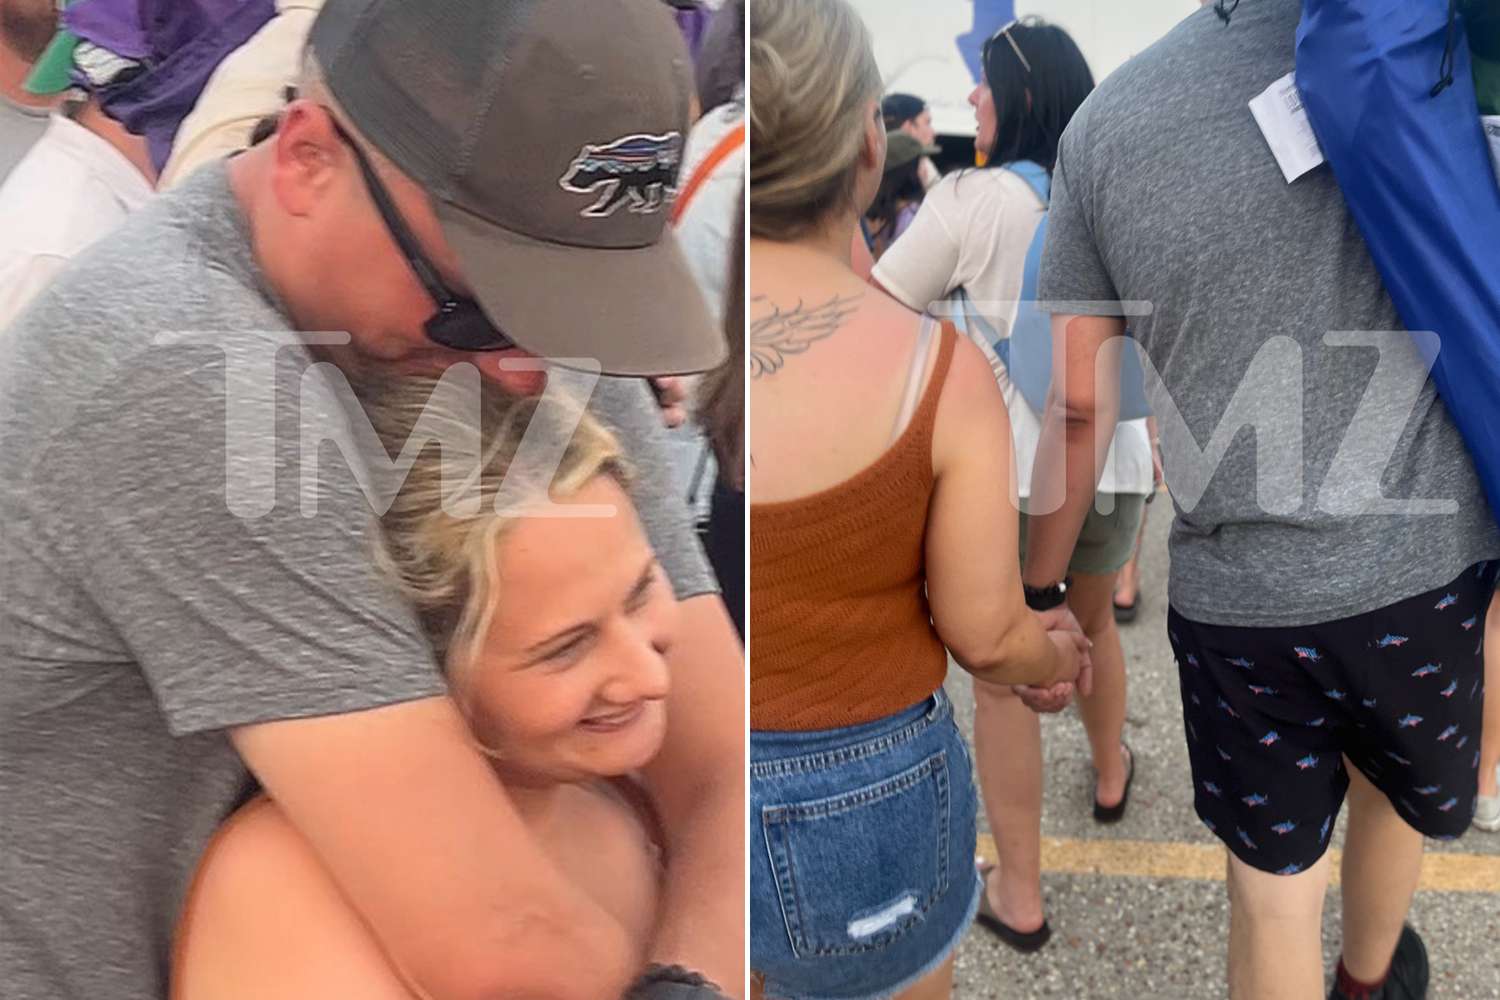 New Photos Show Gypsy-Rose Blanchard Cuddling and Holding Hands with Ex-Fiancé